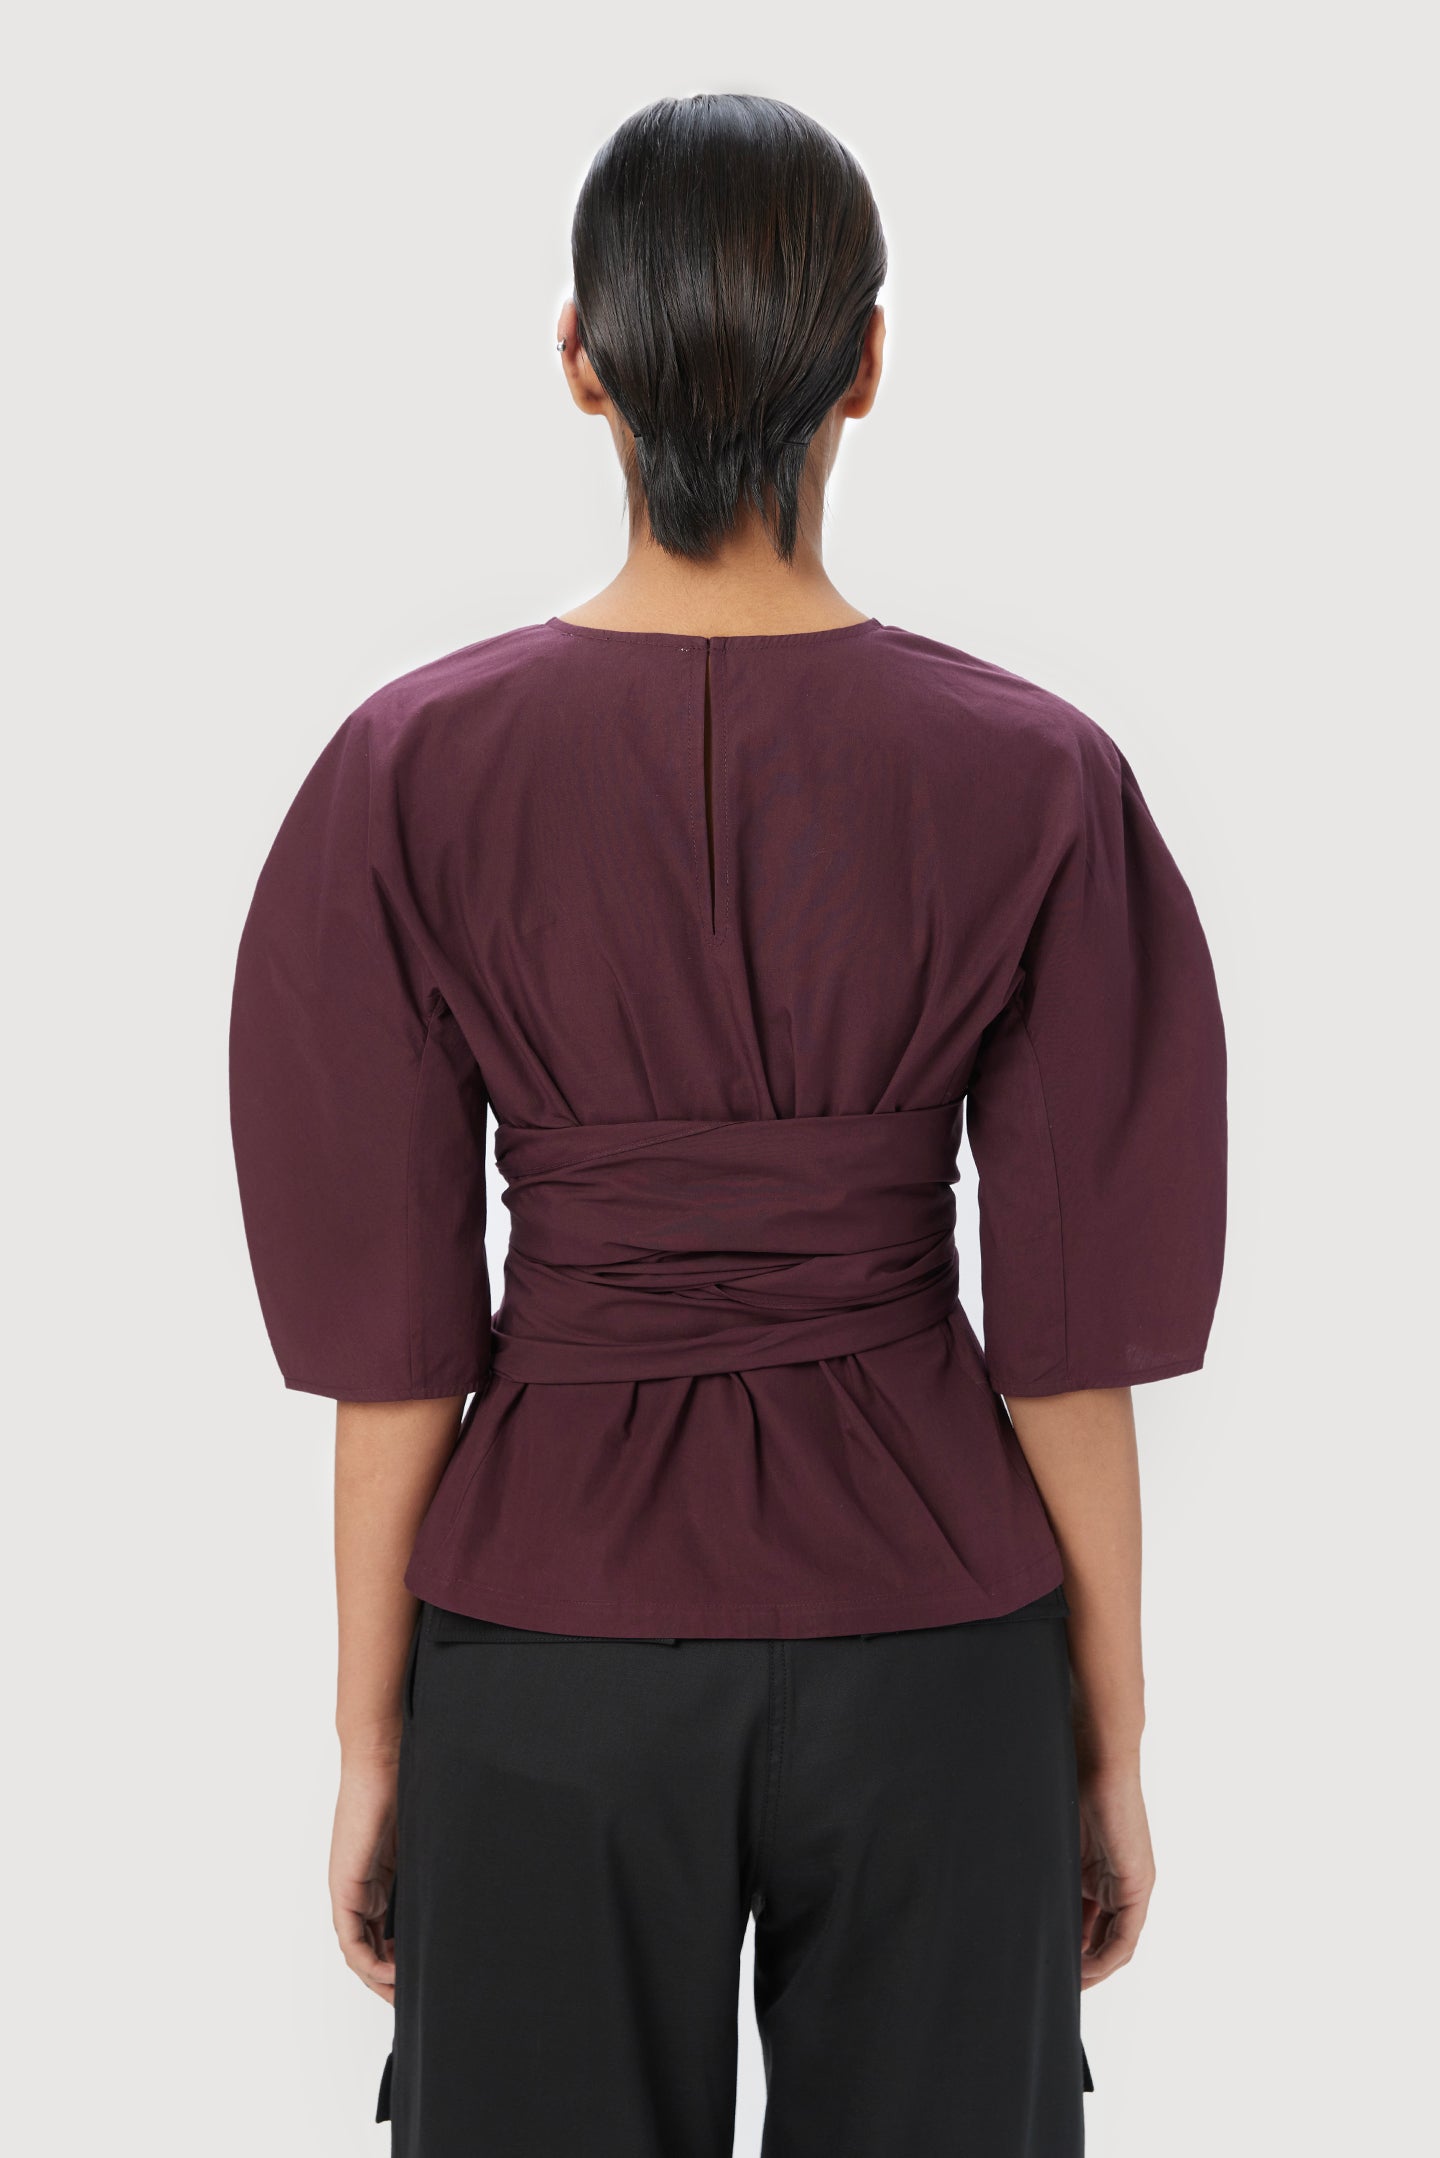 Slim Fit Round Neck Top with Soft Rounded Shoulders